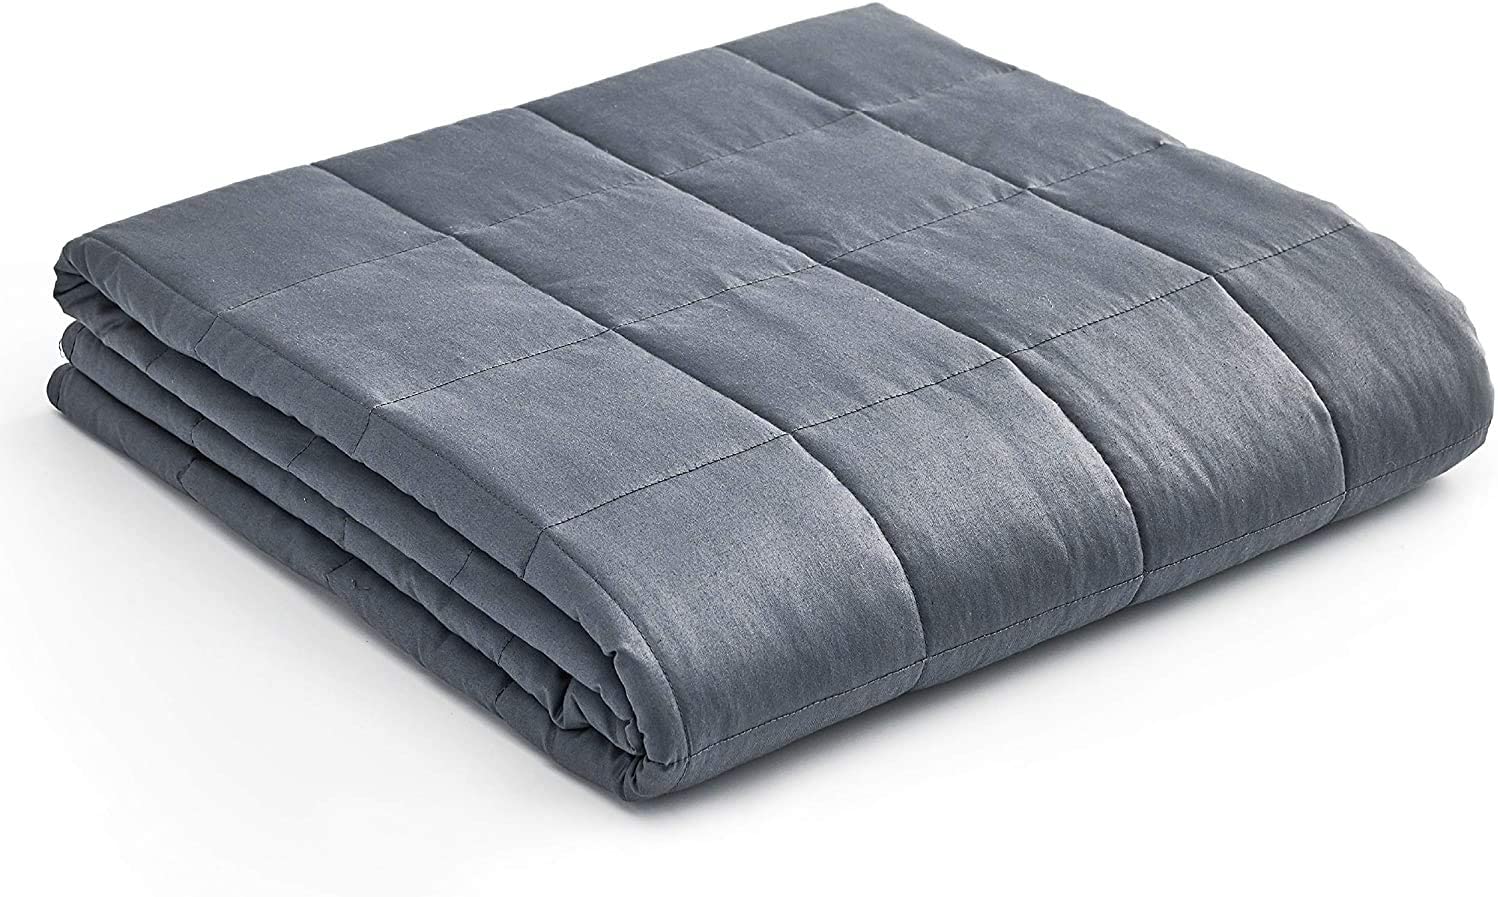 YnM 2.0 Oeko-Tex & Glass Beads 15-Pound Weighted Blanket